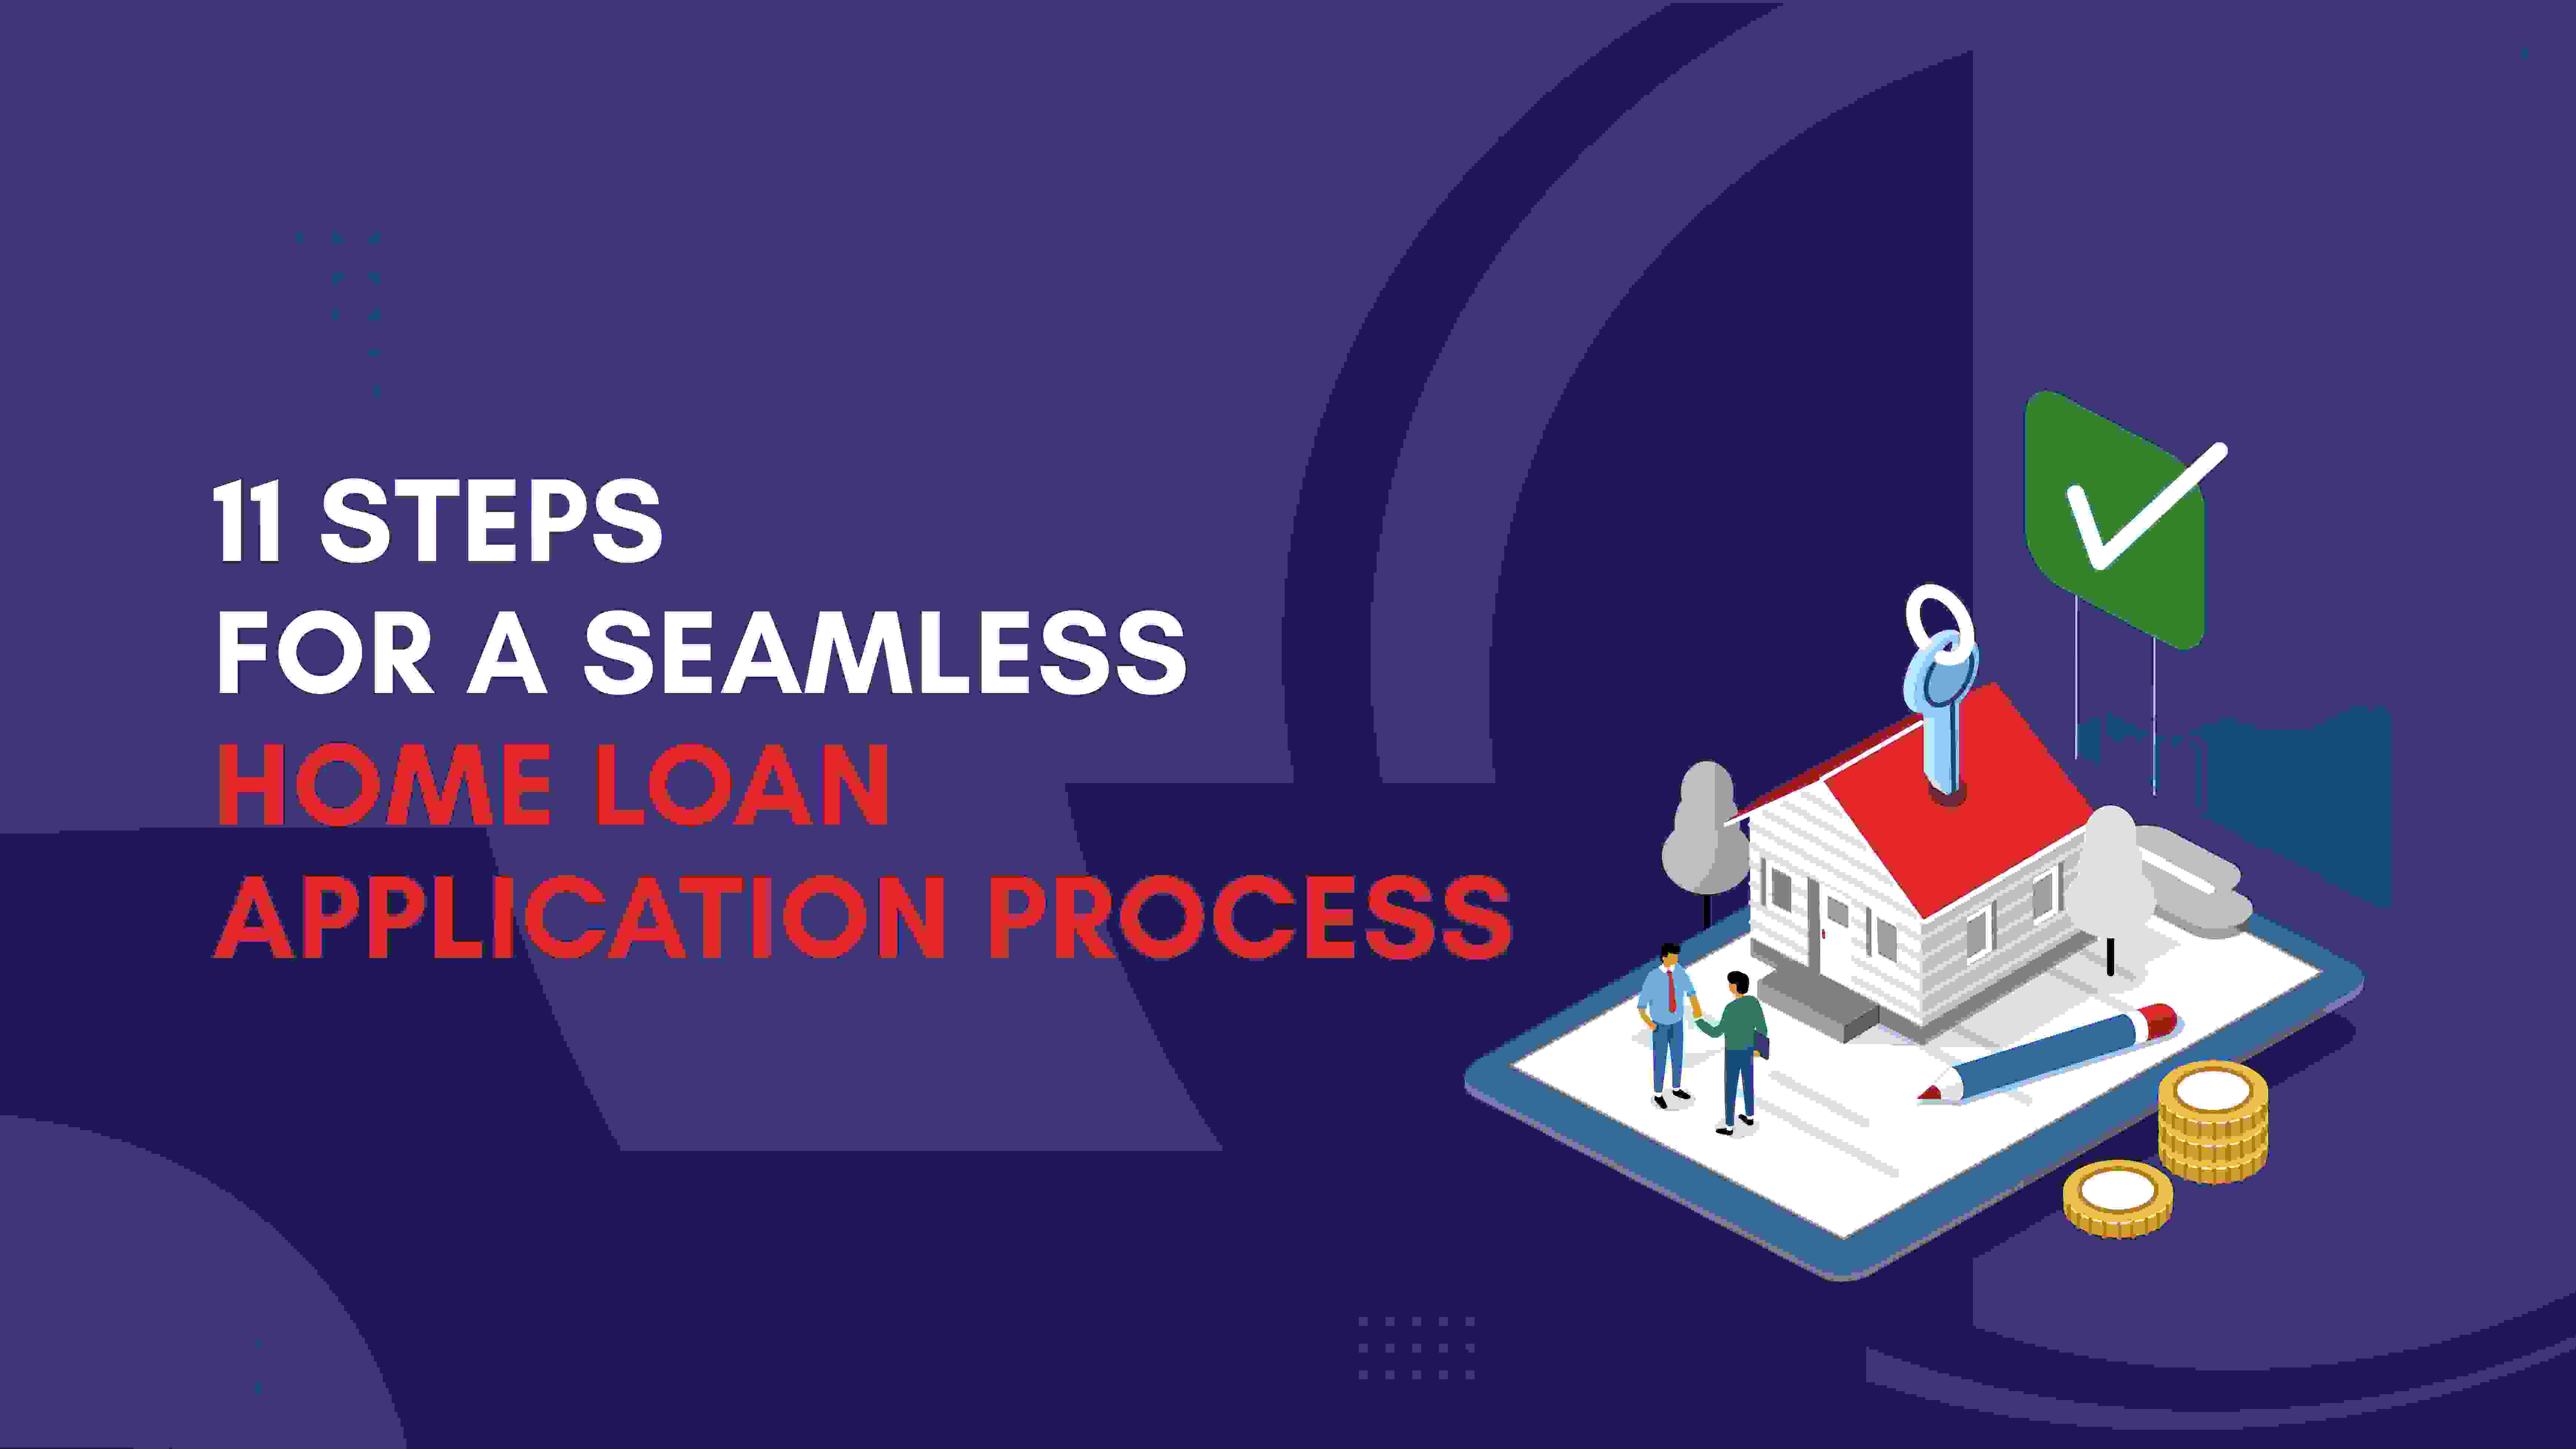 Home Loan Application Process: 11 Steps to Seamless Ownership